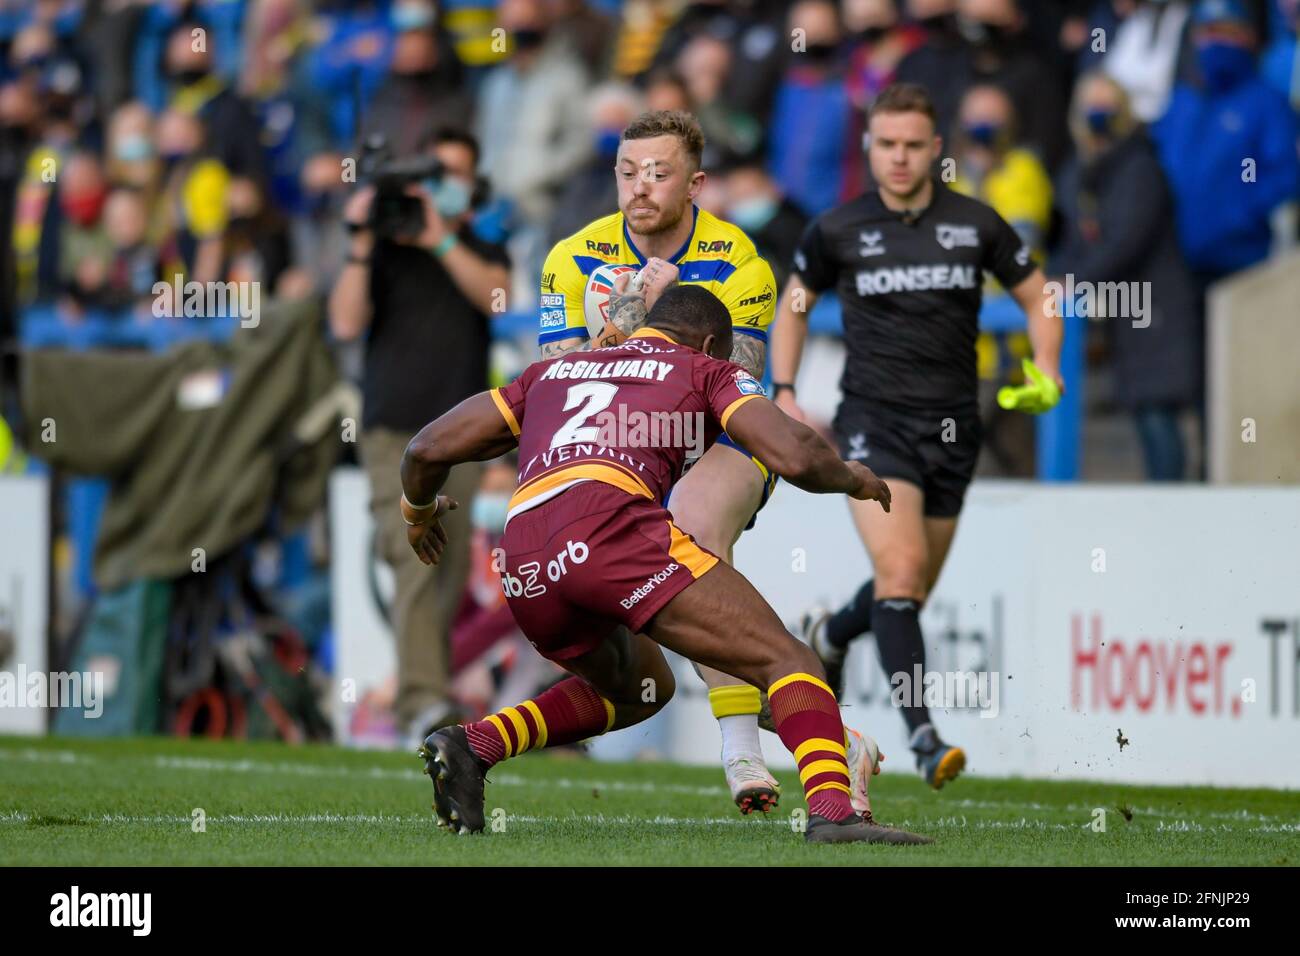 Warrington, UK. 17th May, 2021. Josh Charnley (5) of Warrington Wolves is tackled by Jermaine McGillvary (2) of Huddersfield Giants in Warrington, United Kingdom on 5/17/2021. (Photo by Simon Whitehead/News Images/Sipa USA) Credit: Sipa USA/Alamy Live News Stock Photo